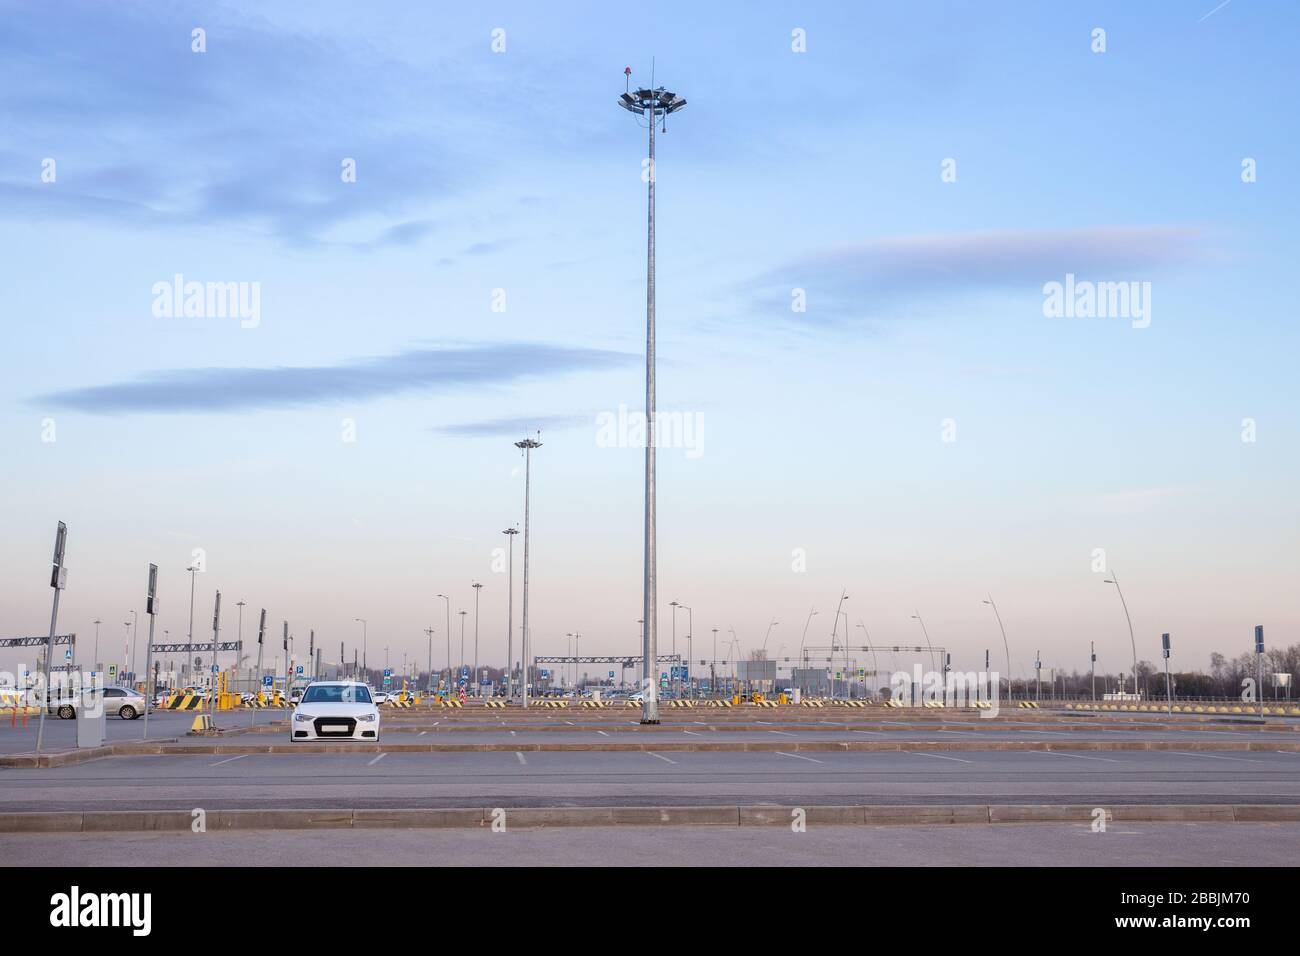 Empty airport parking after closure flights due to coronavirus/covid-19 and outbreak travel restrictions. Travel industry financial crisis, stop of fl Stock Photo